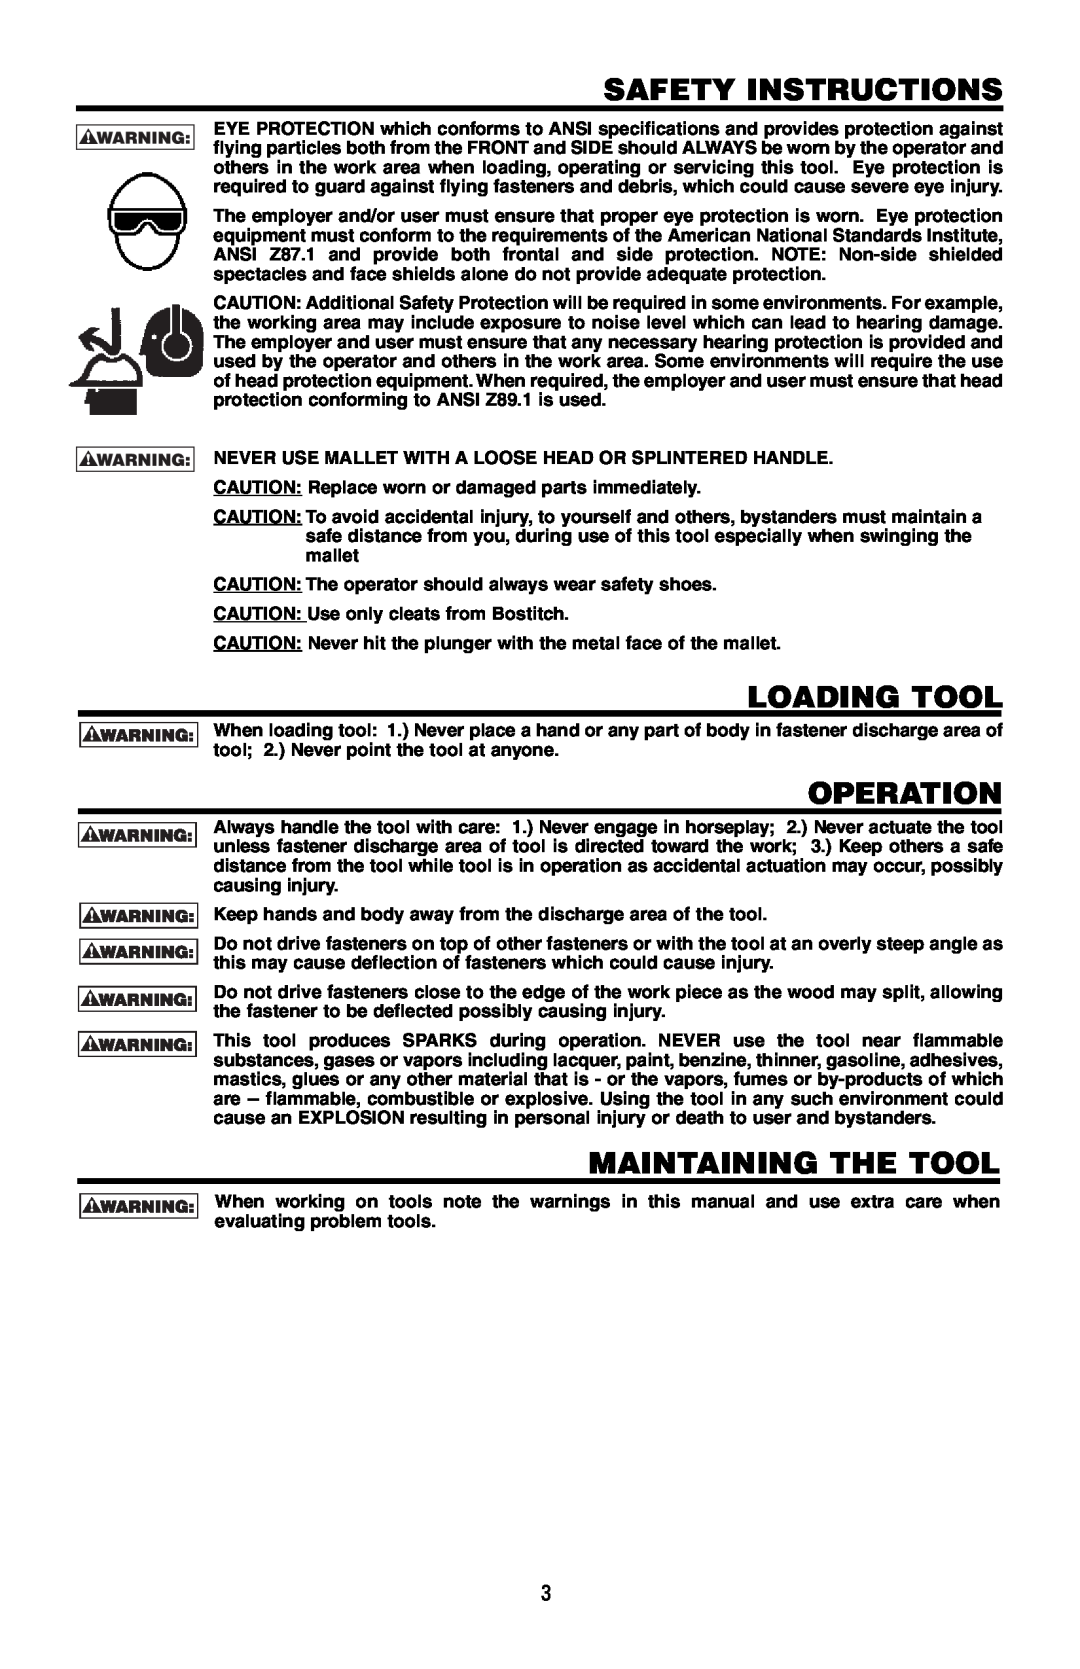 Bostitch 175616REVB, MFN-200 manual Safety Instructions, Loading Tool, Operation, Maintaining The Tool 